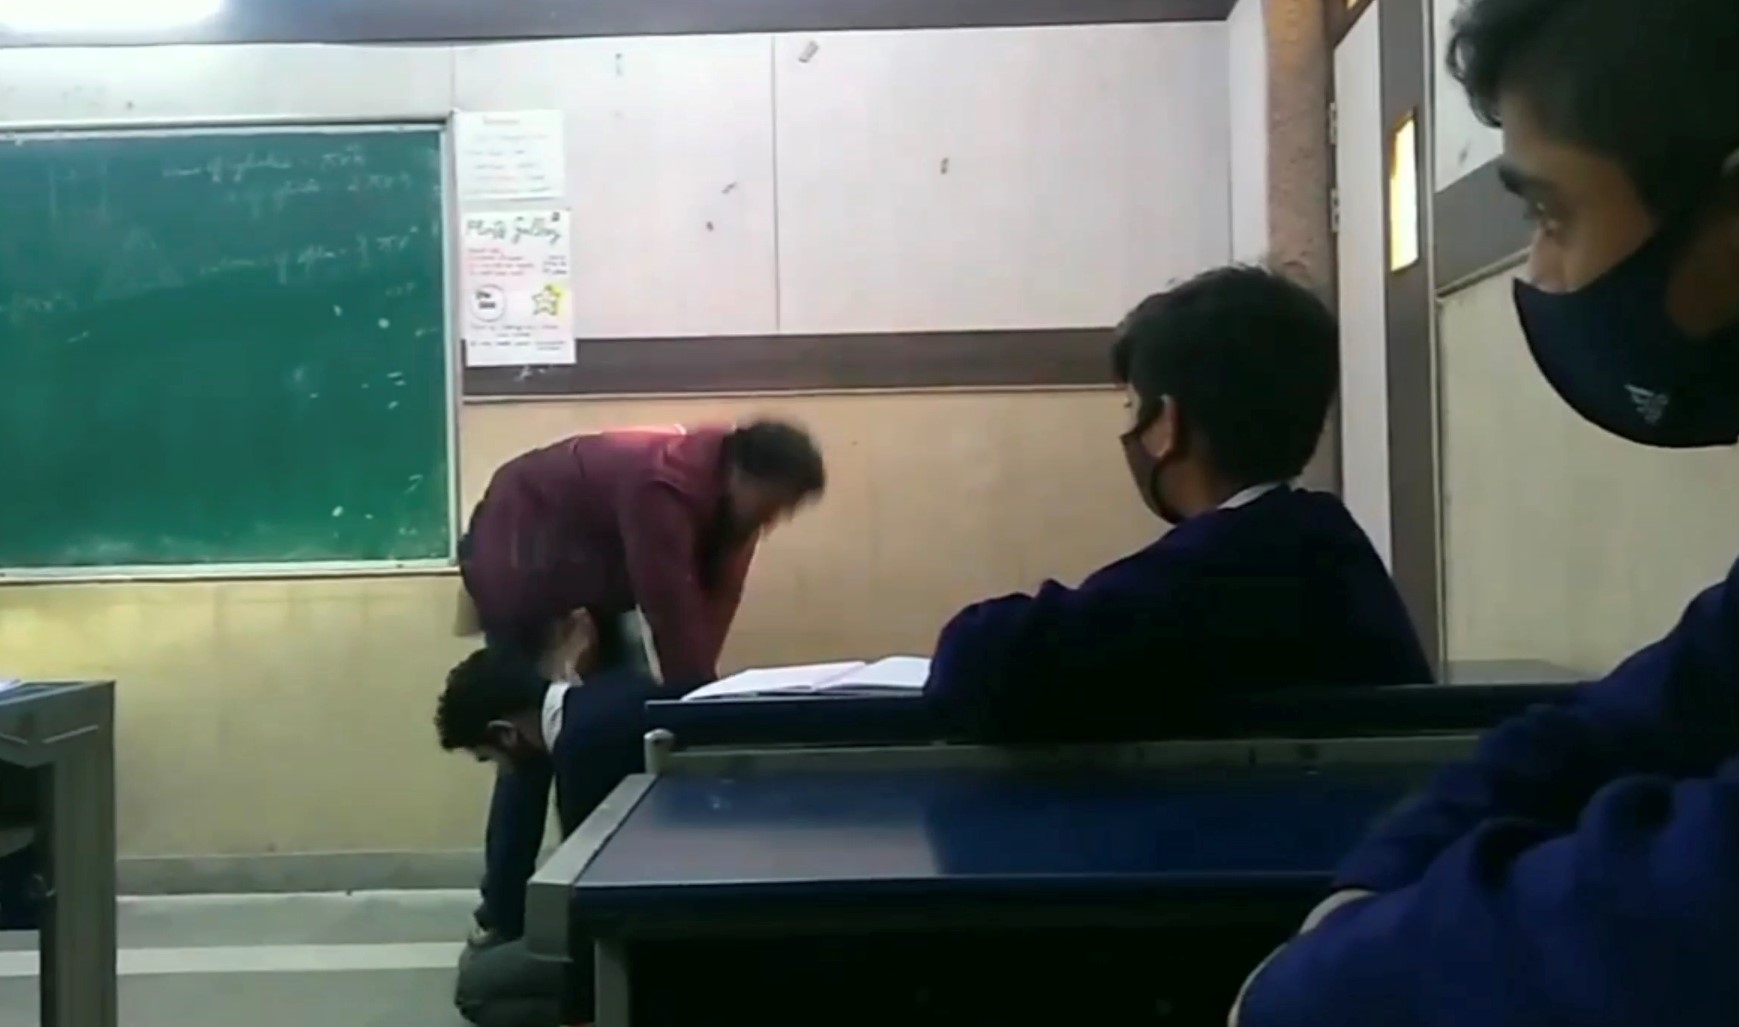 video-of-student-beating-goes-viral-bjp-leader-made-serious-allegations-against-kejriwal-government